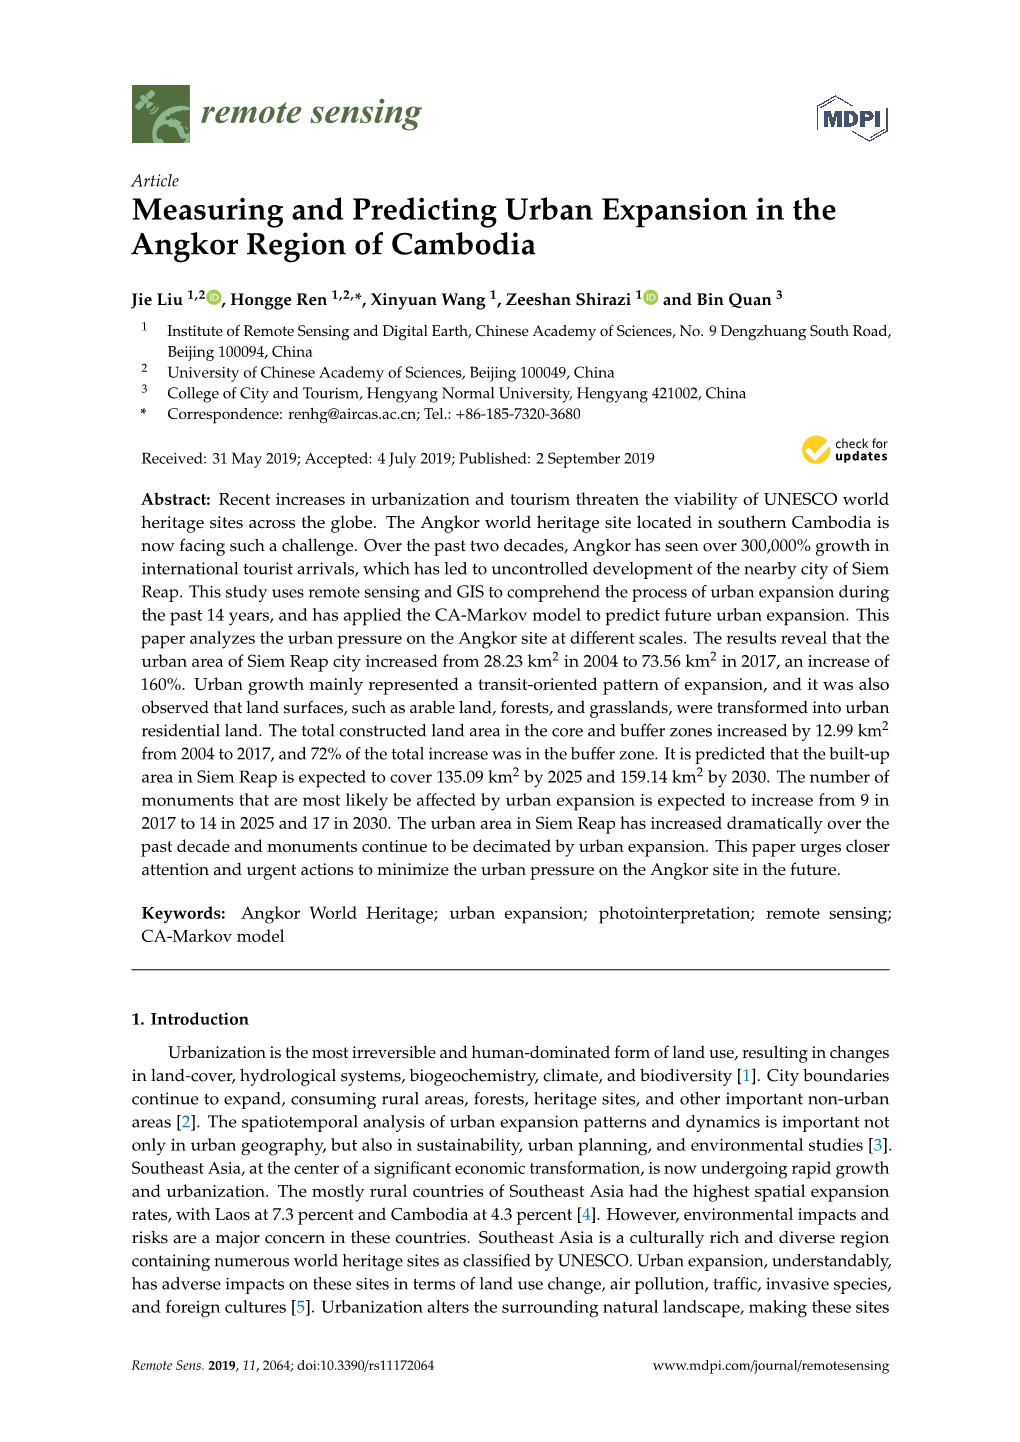 Measuring and Predicting Urban Expansion in the Angkor Region of Cambodia